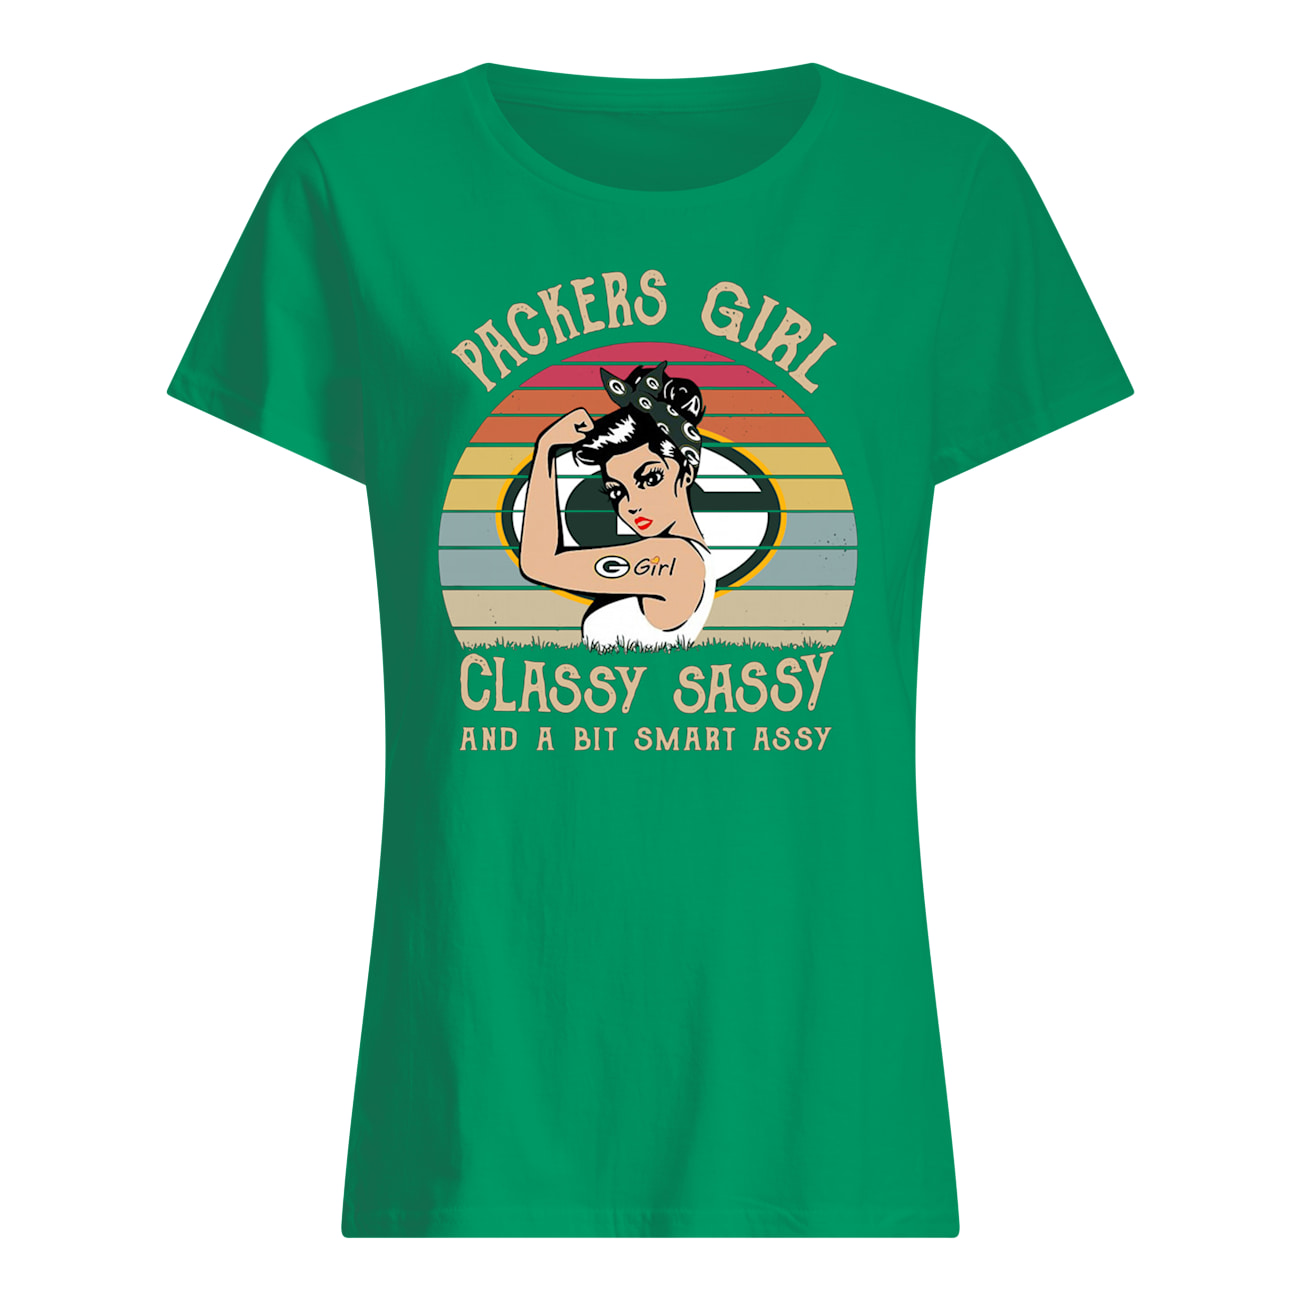 Packers girl classy sassy and a bit smart assy green bay packers womens shirt